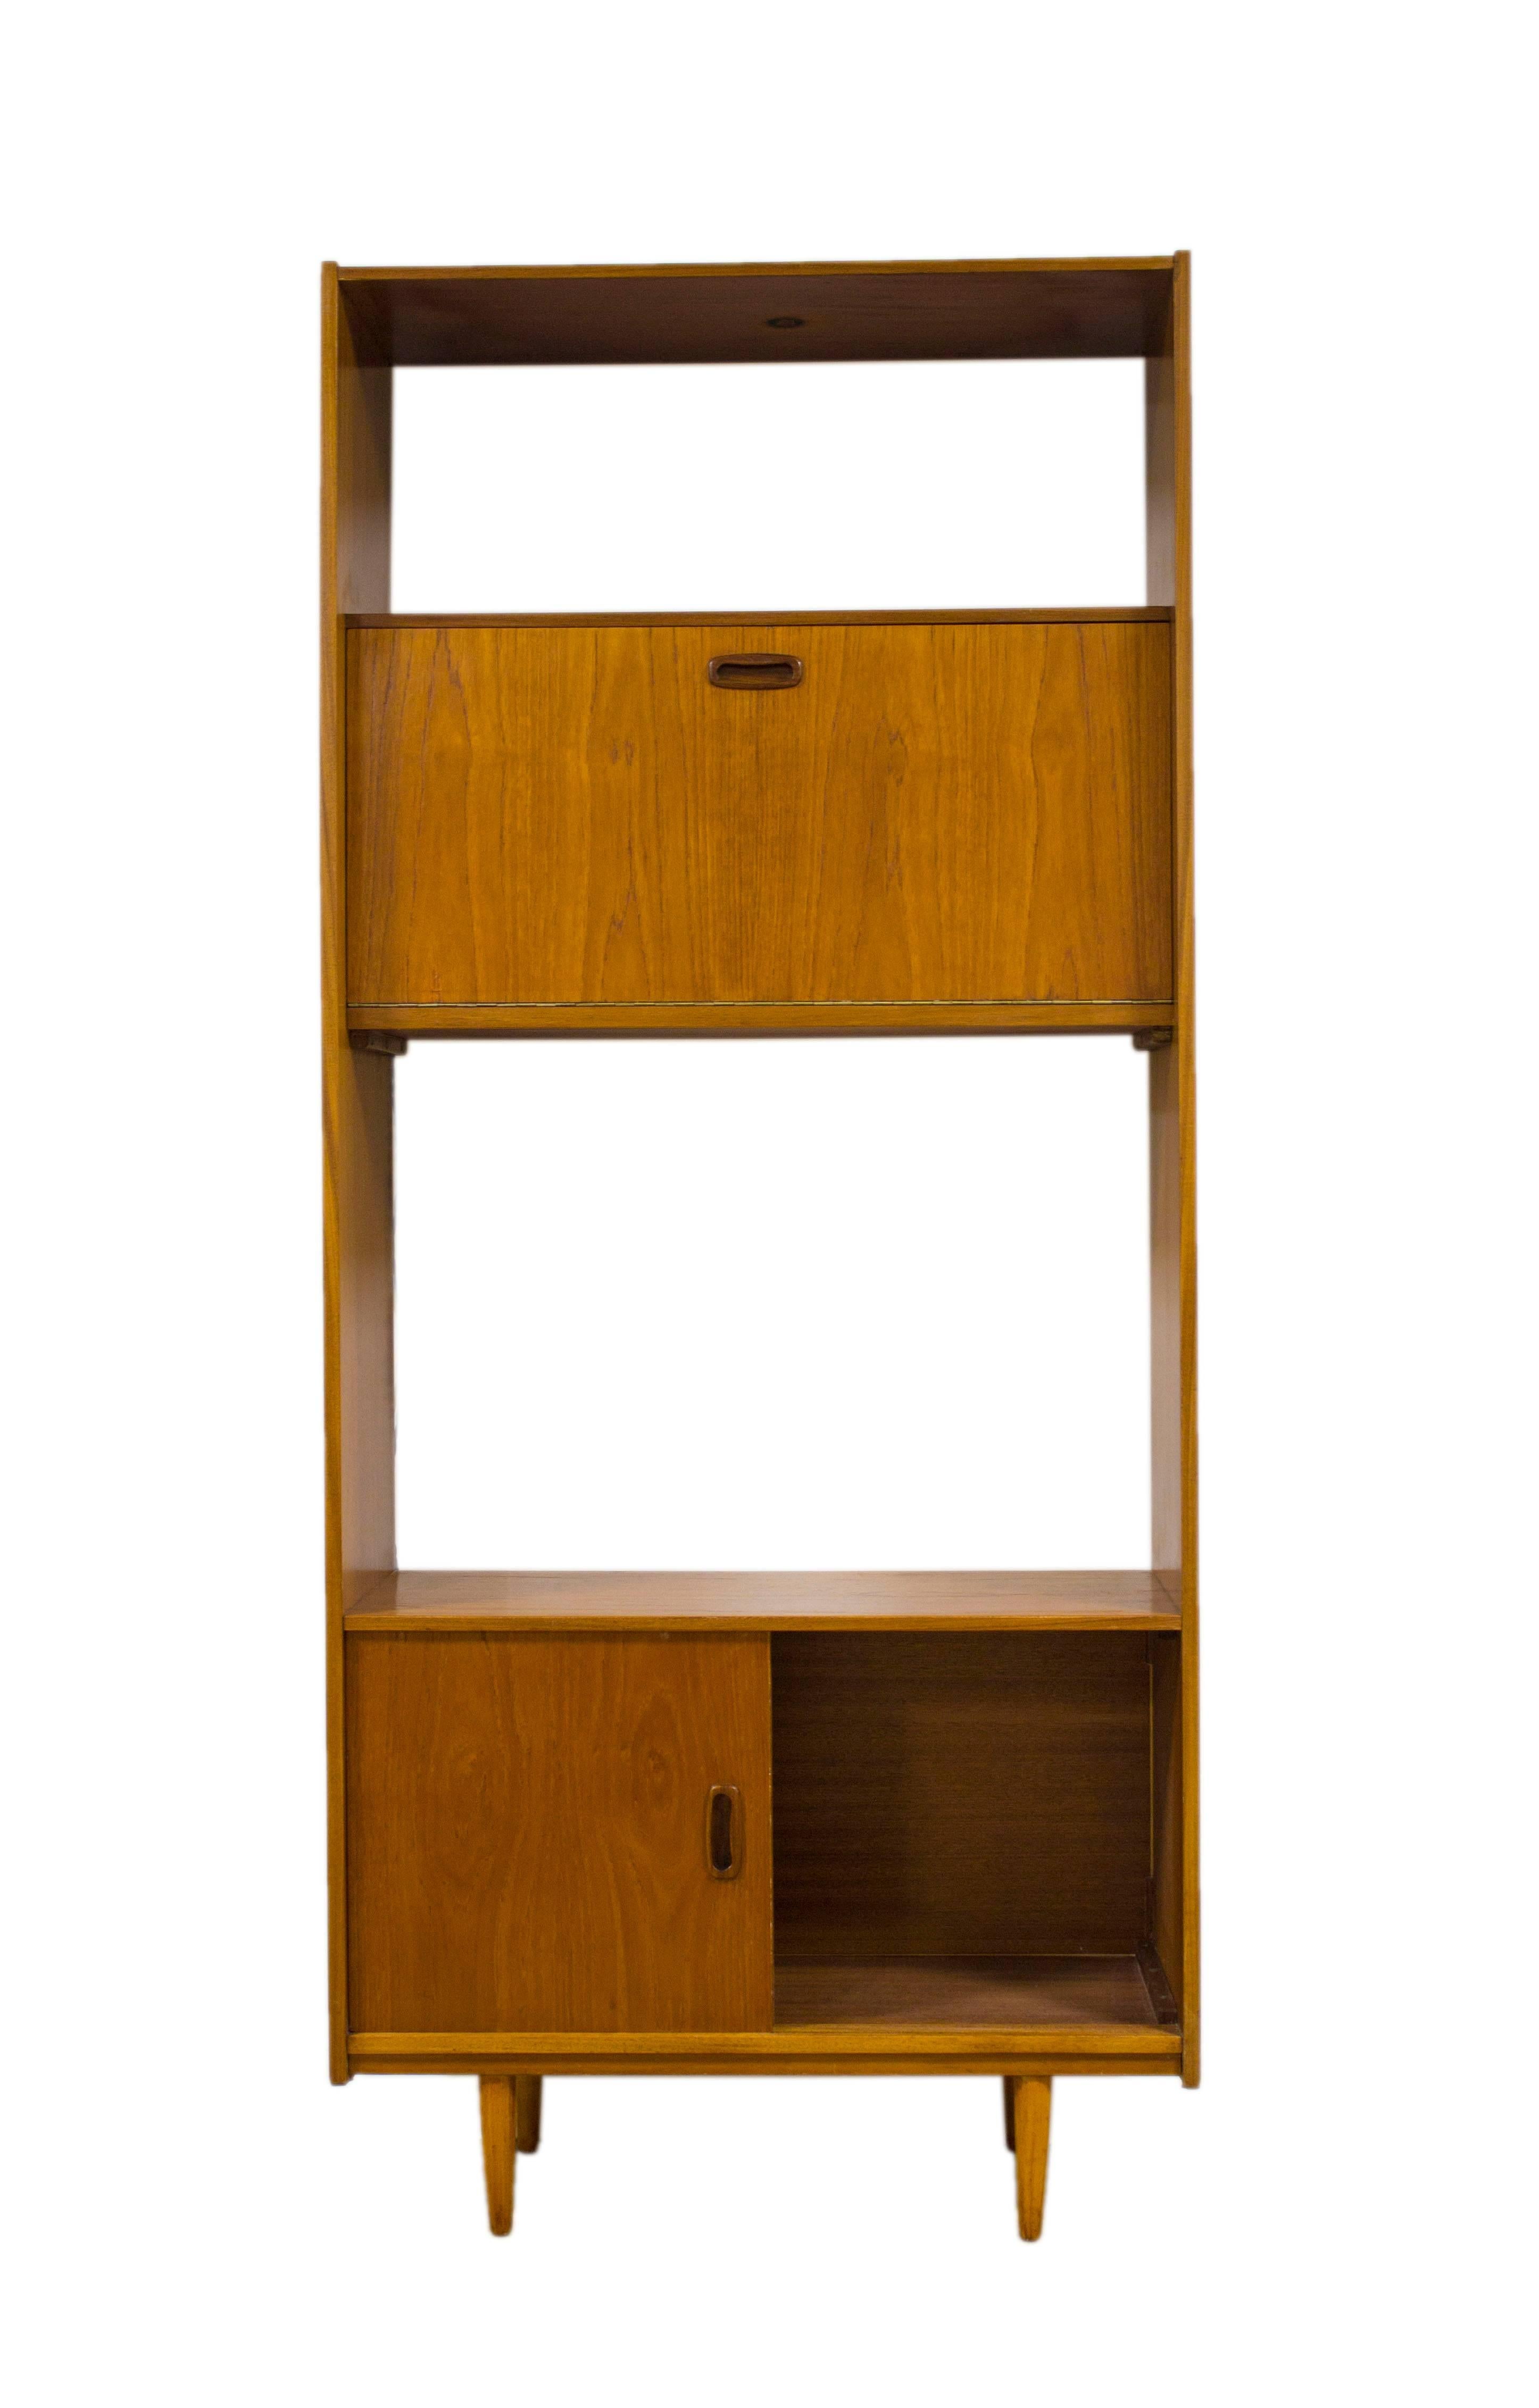 What better way to display your treasured possessions than on a beautifully crafted Danish designed room divider shelving unit in stunning teak with it’s beautiful lines, rich grain and stunning tapered design. Standing proudly on atomic design